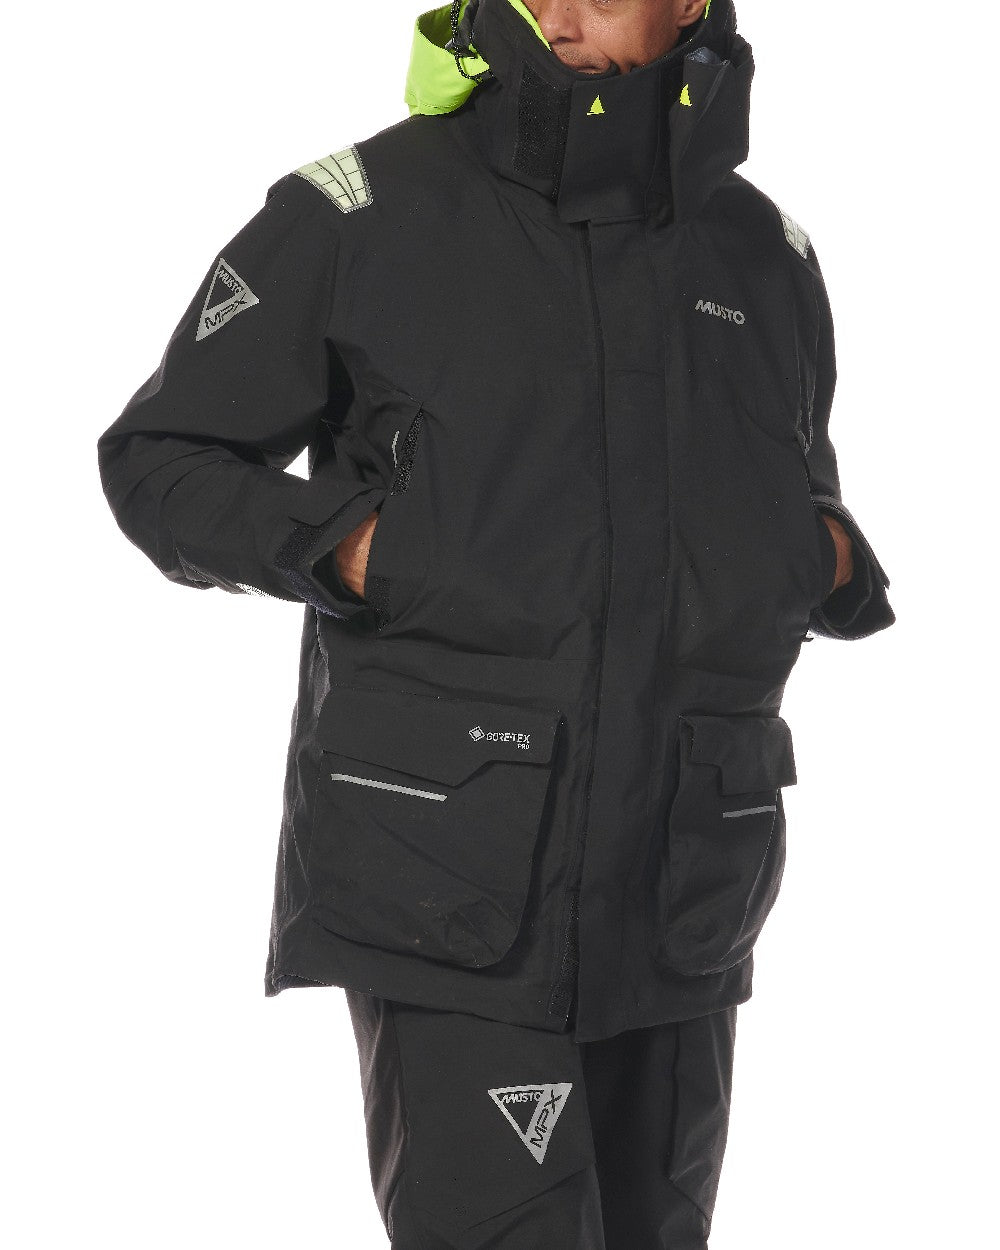 Black coloured Musto Mens Mpx Gtx Pro Offshore Jacket 2.0 on white background 